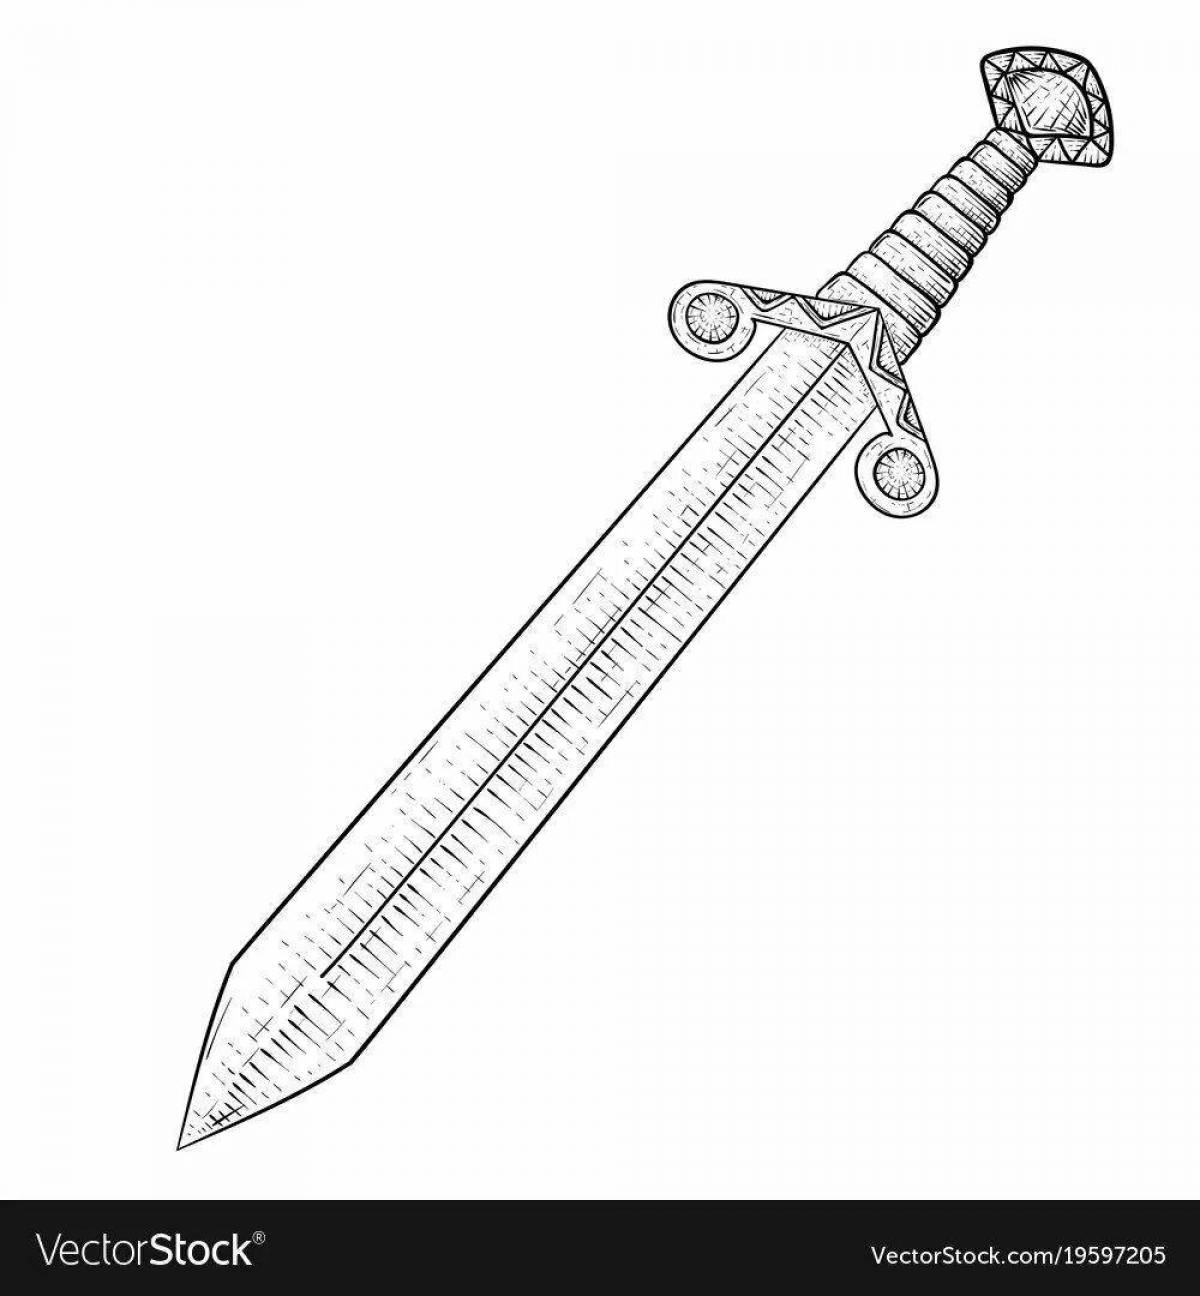 Treasurer's charming sword coloring page